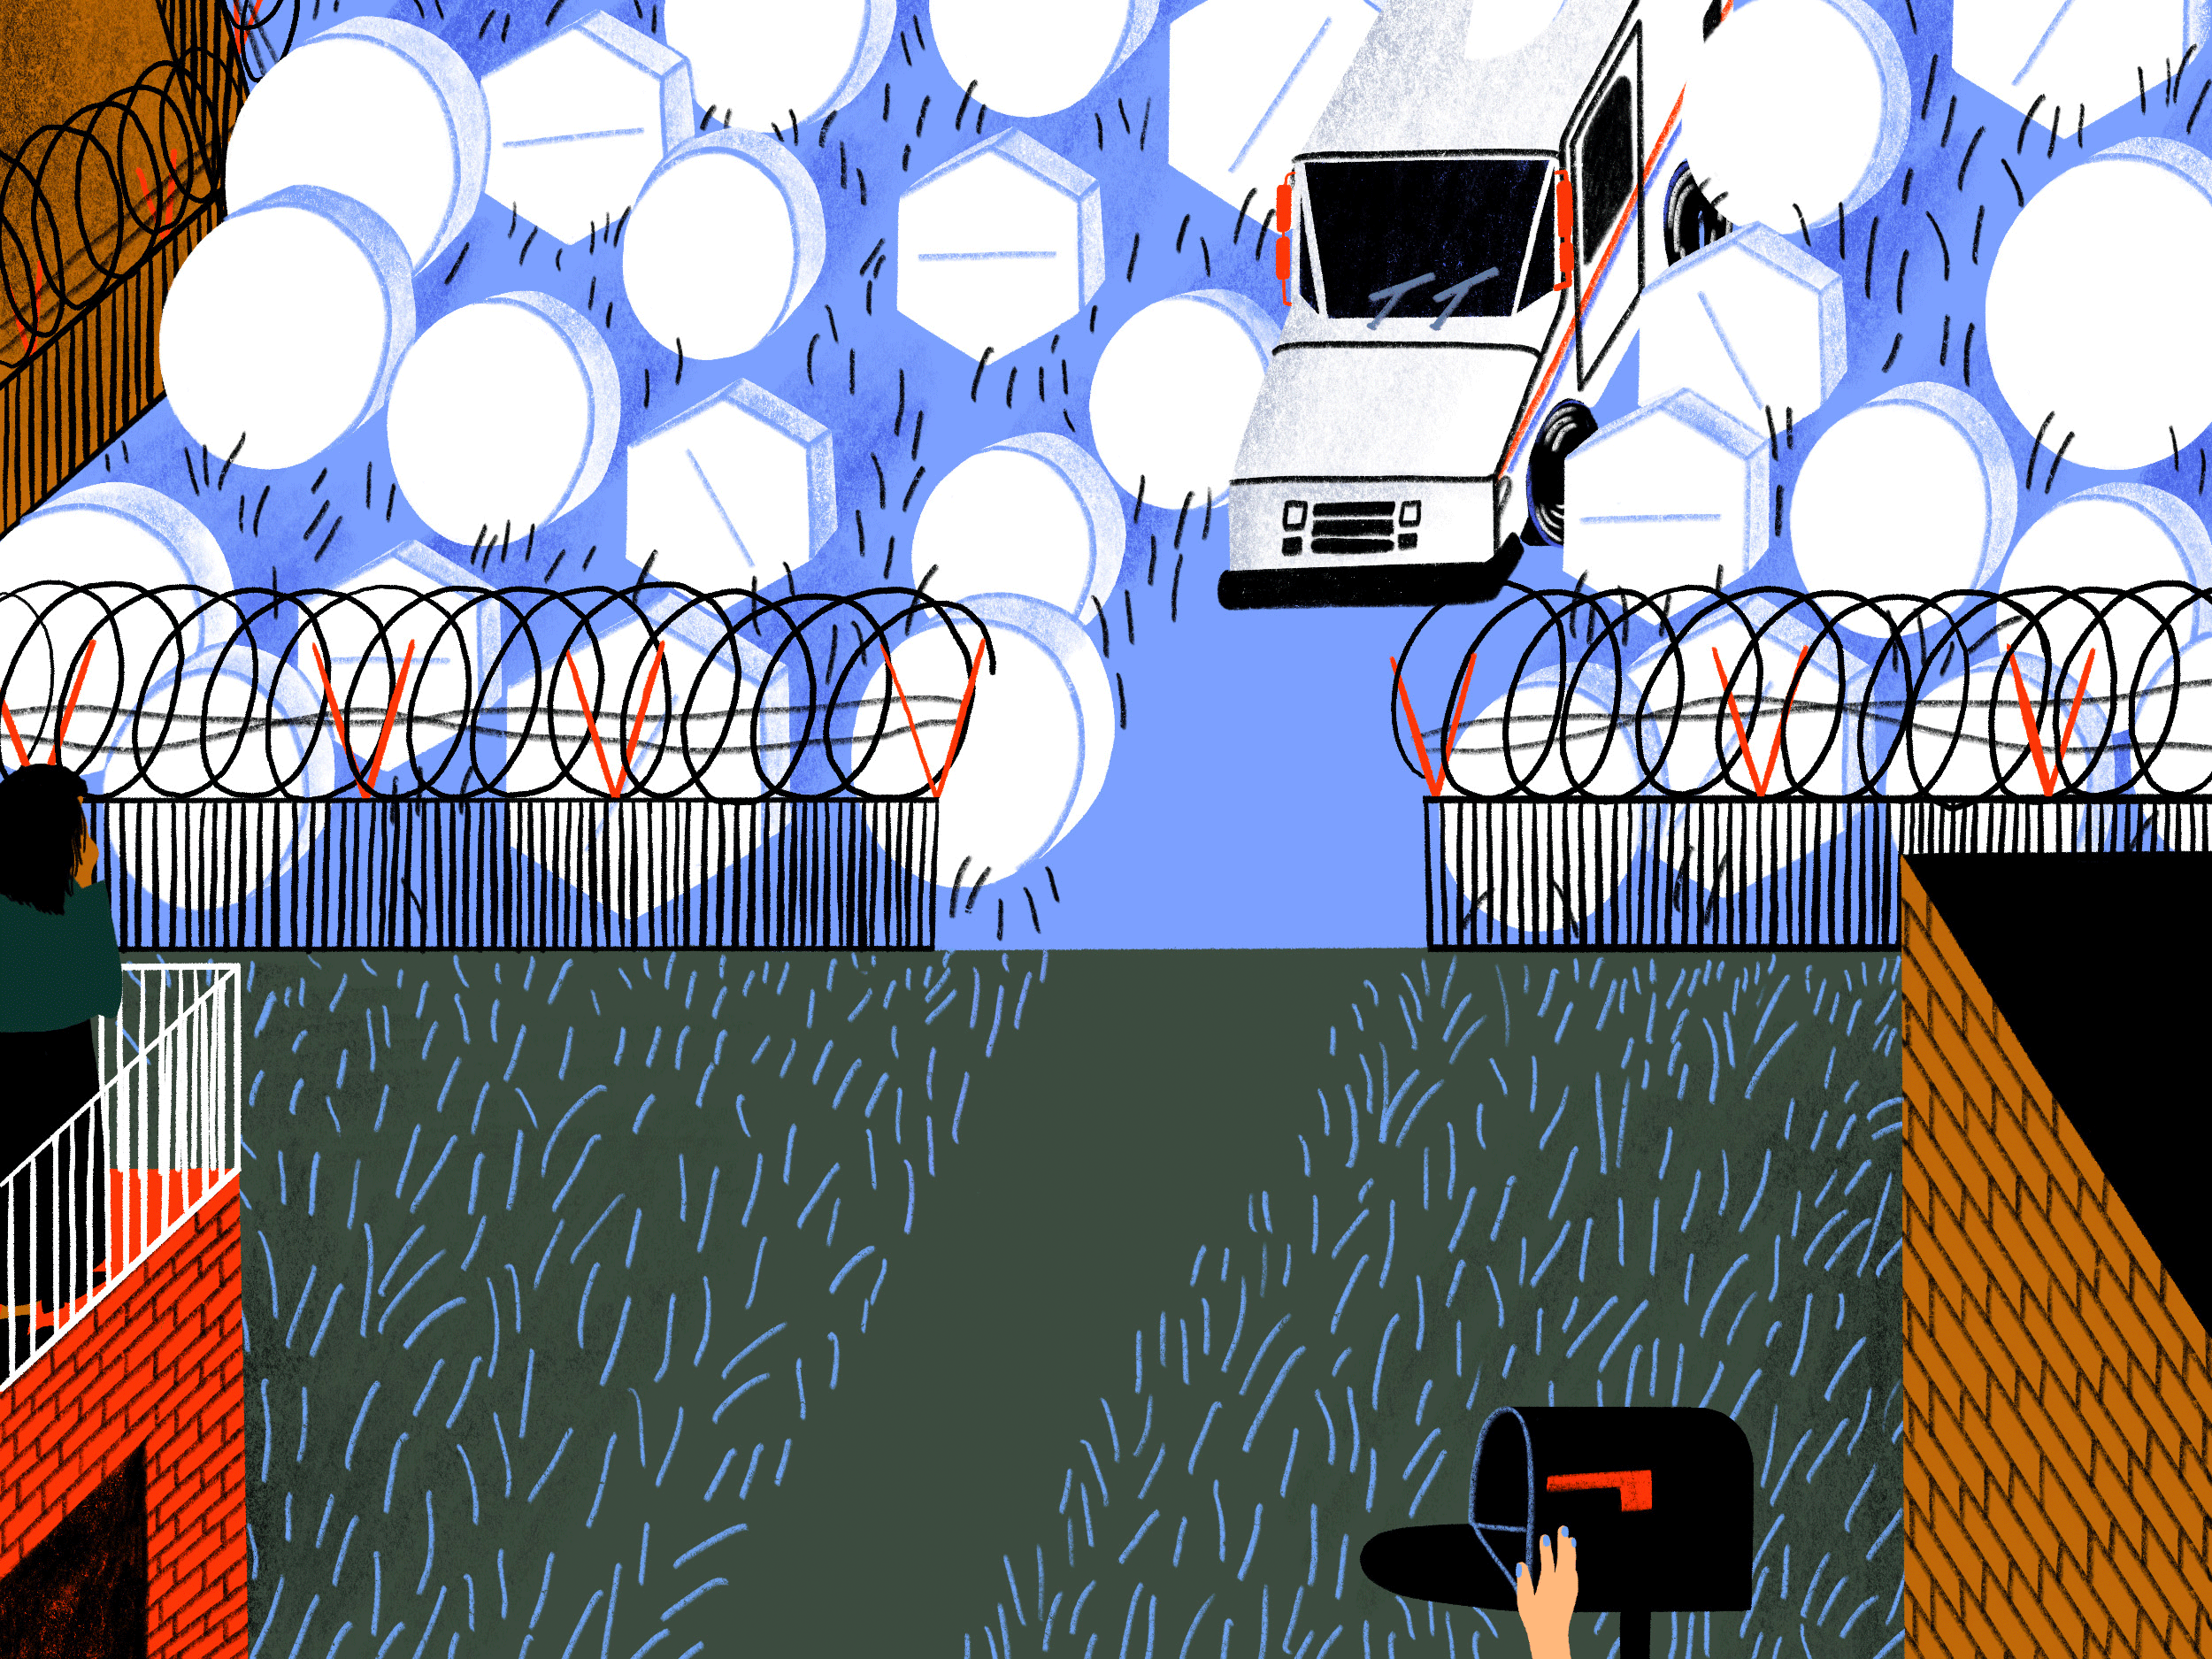 A USPS mail truck drives through a field of pills to make a delivery at a residence protected by barbed wire. A woman watches from a second floor balcony.